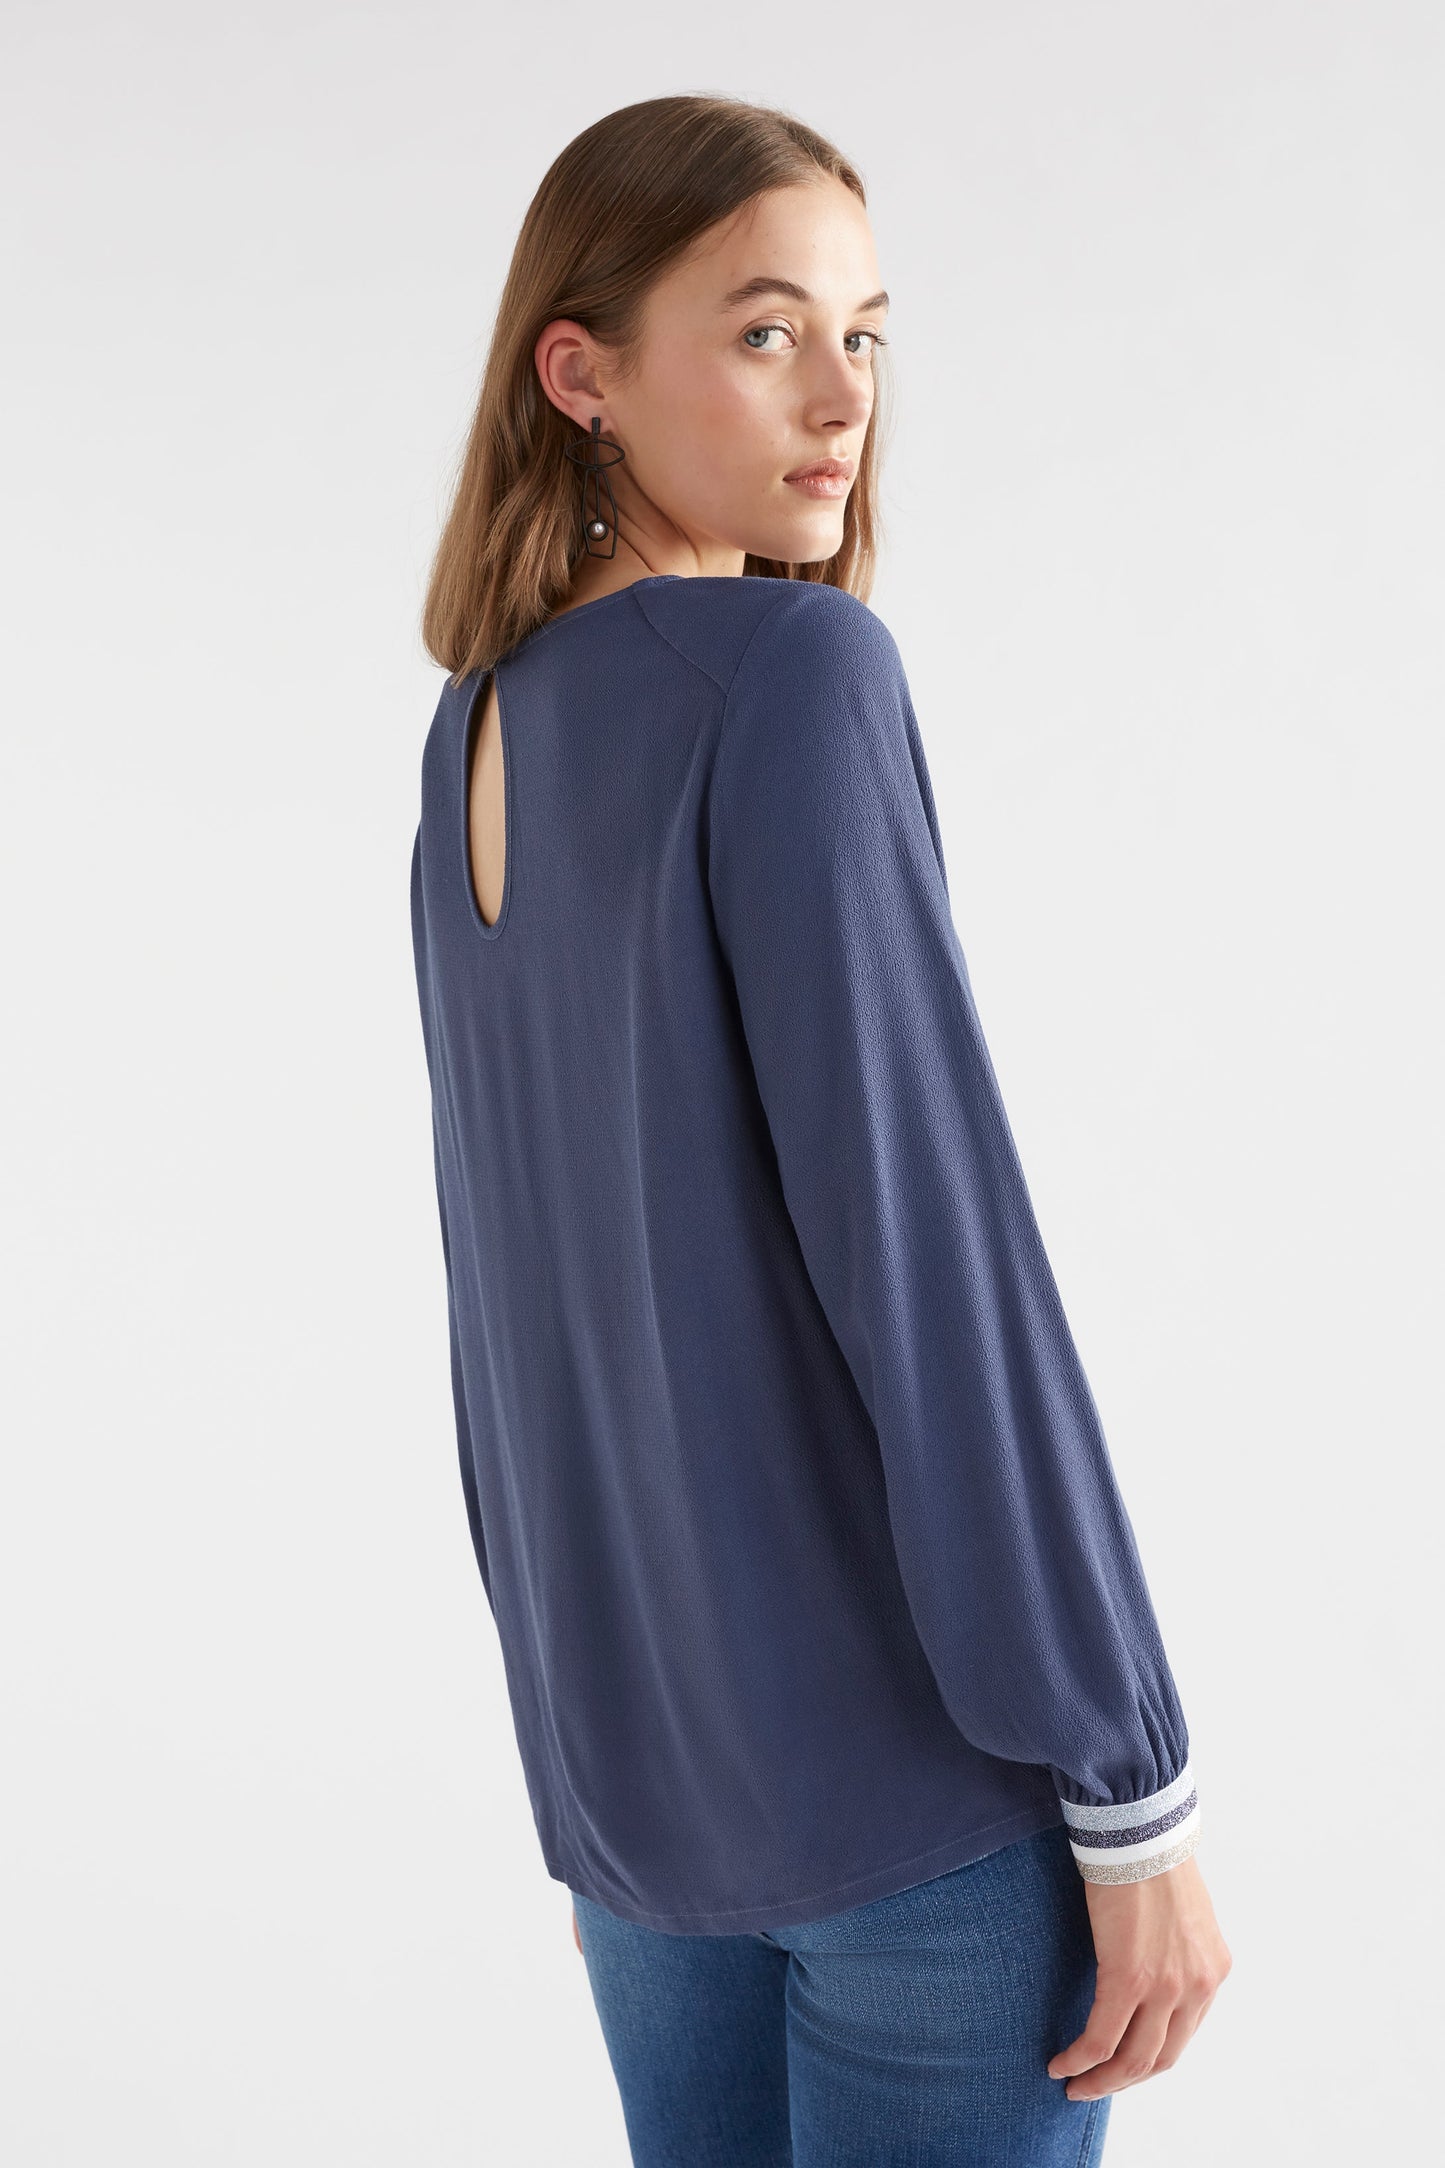 Odin Round Neck Long Sleeve Top with Lurex Elastic Cuff Model Back | SLATE BLUE